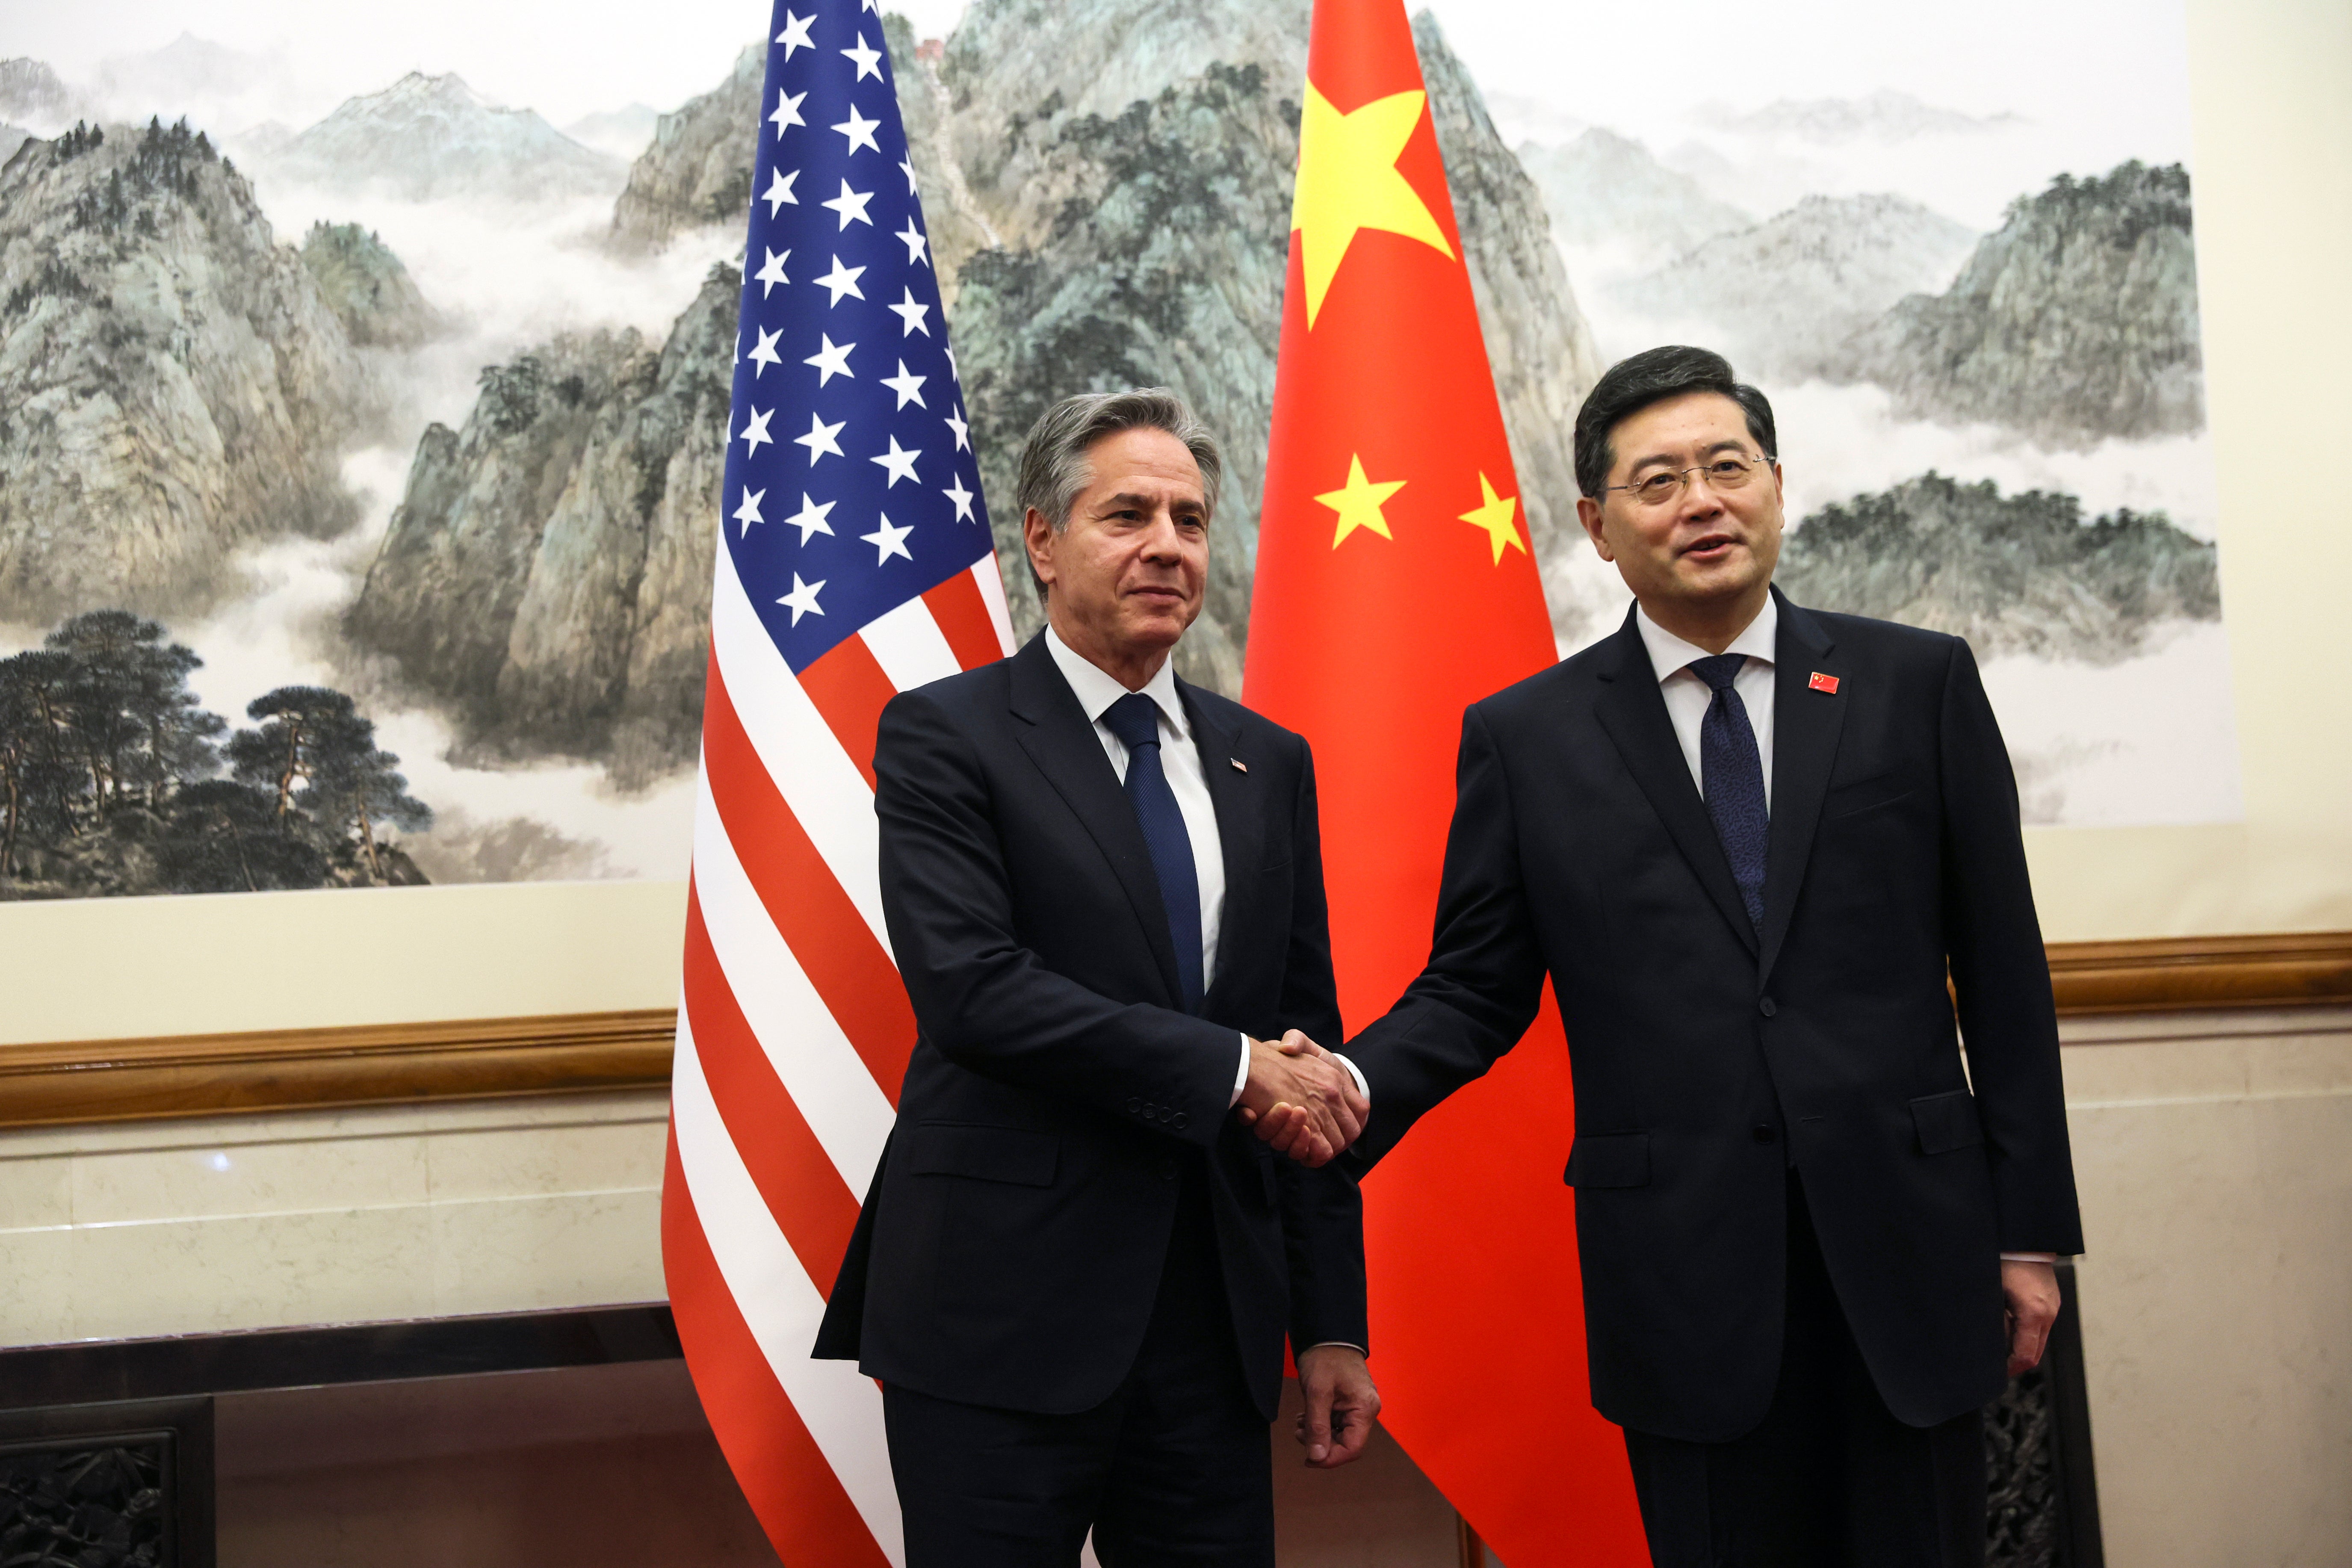 US secretary of state Antony Blinken, left, shakes hands with Chinese foreign minister Qin Gang, right, at the Diaoyutai State Guest house in Beijing, China on Sunday